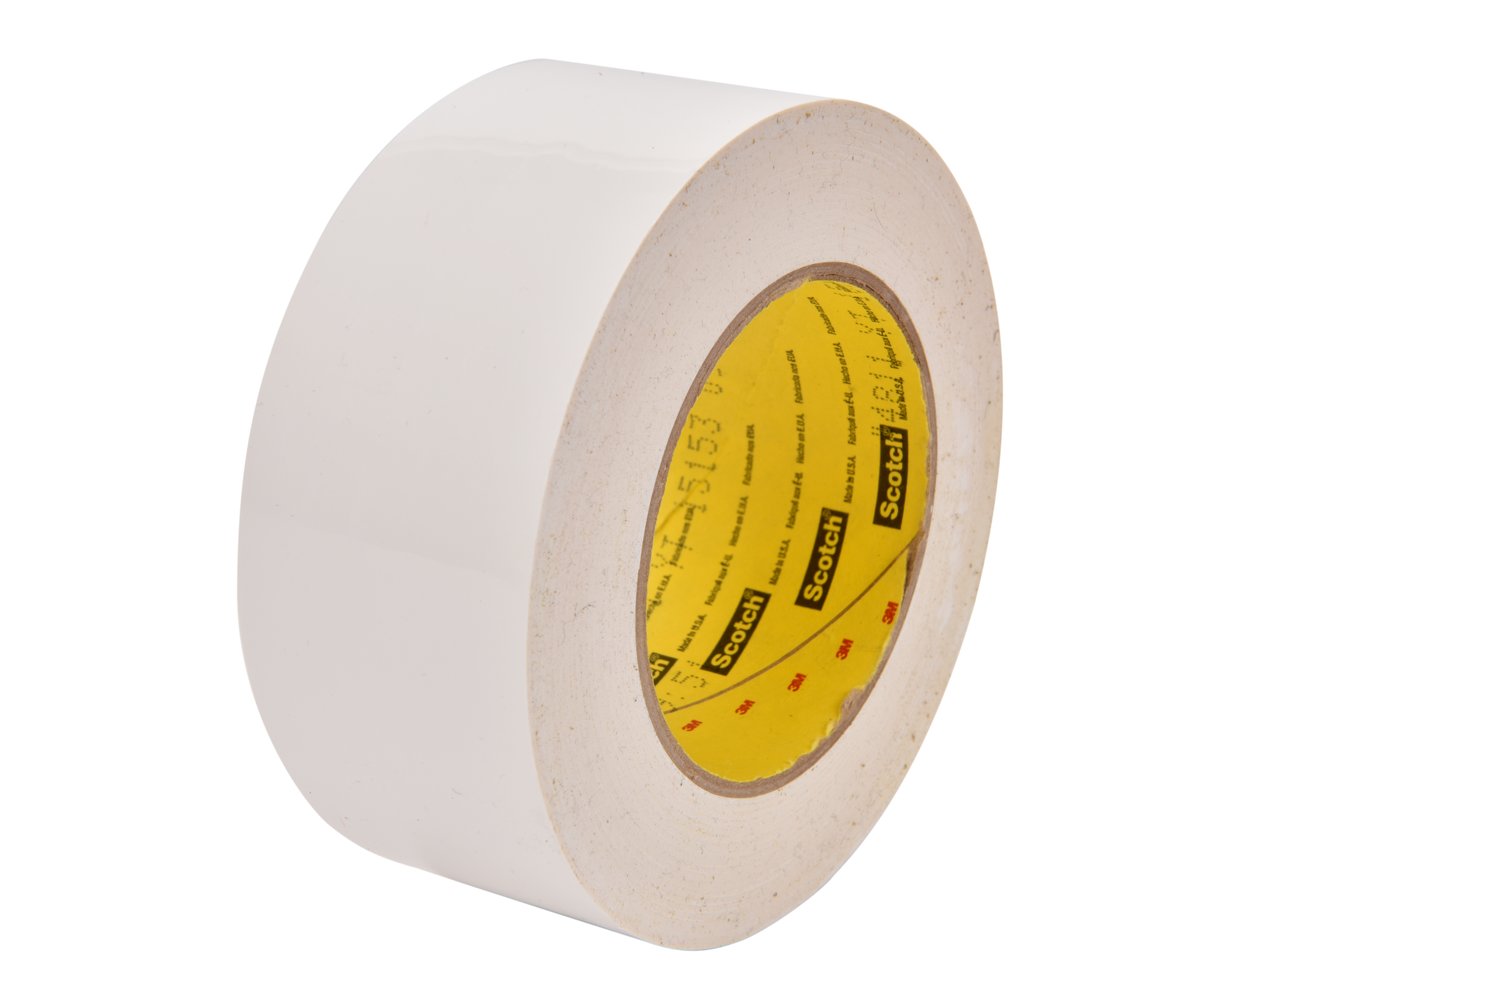 7010375934 - 3M Preservation Sealing Tape 4811, White, 6 in x 72 yd, 9.5 mil, 8
rolls per case